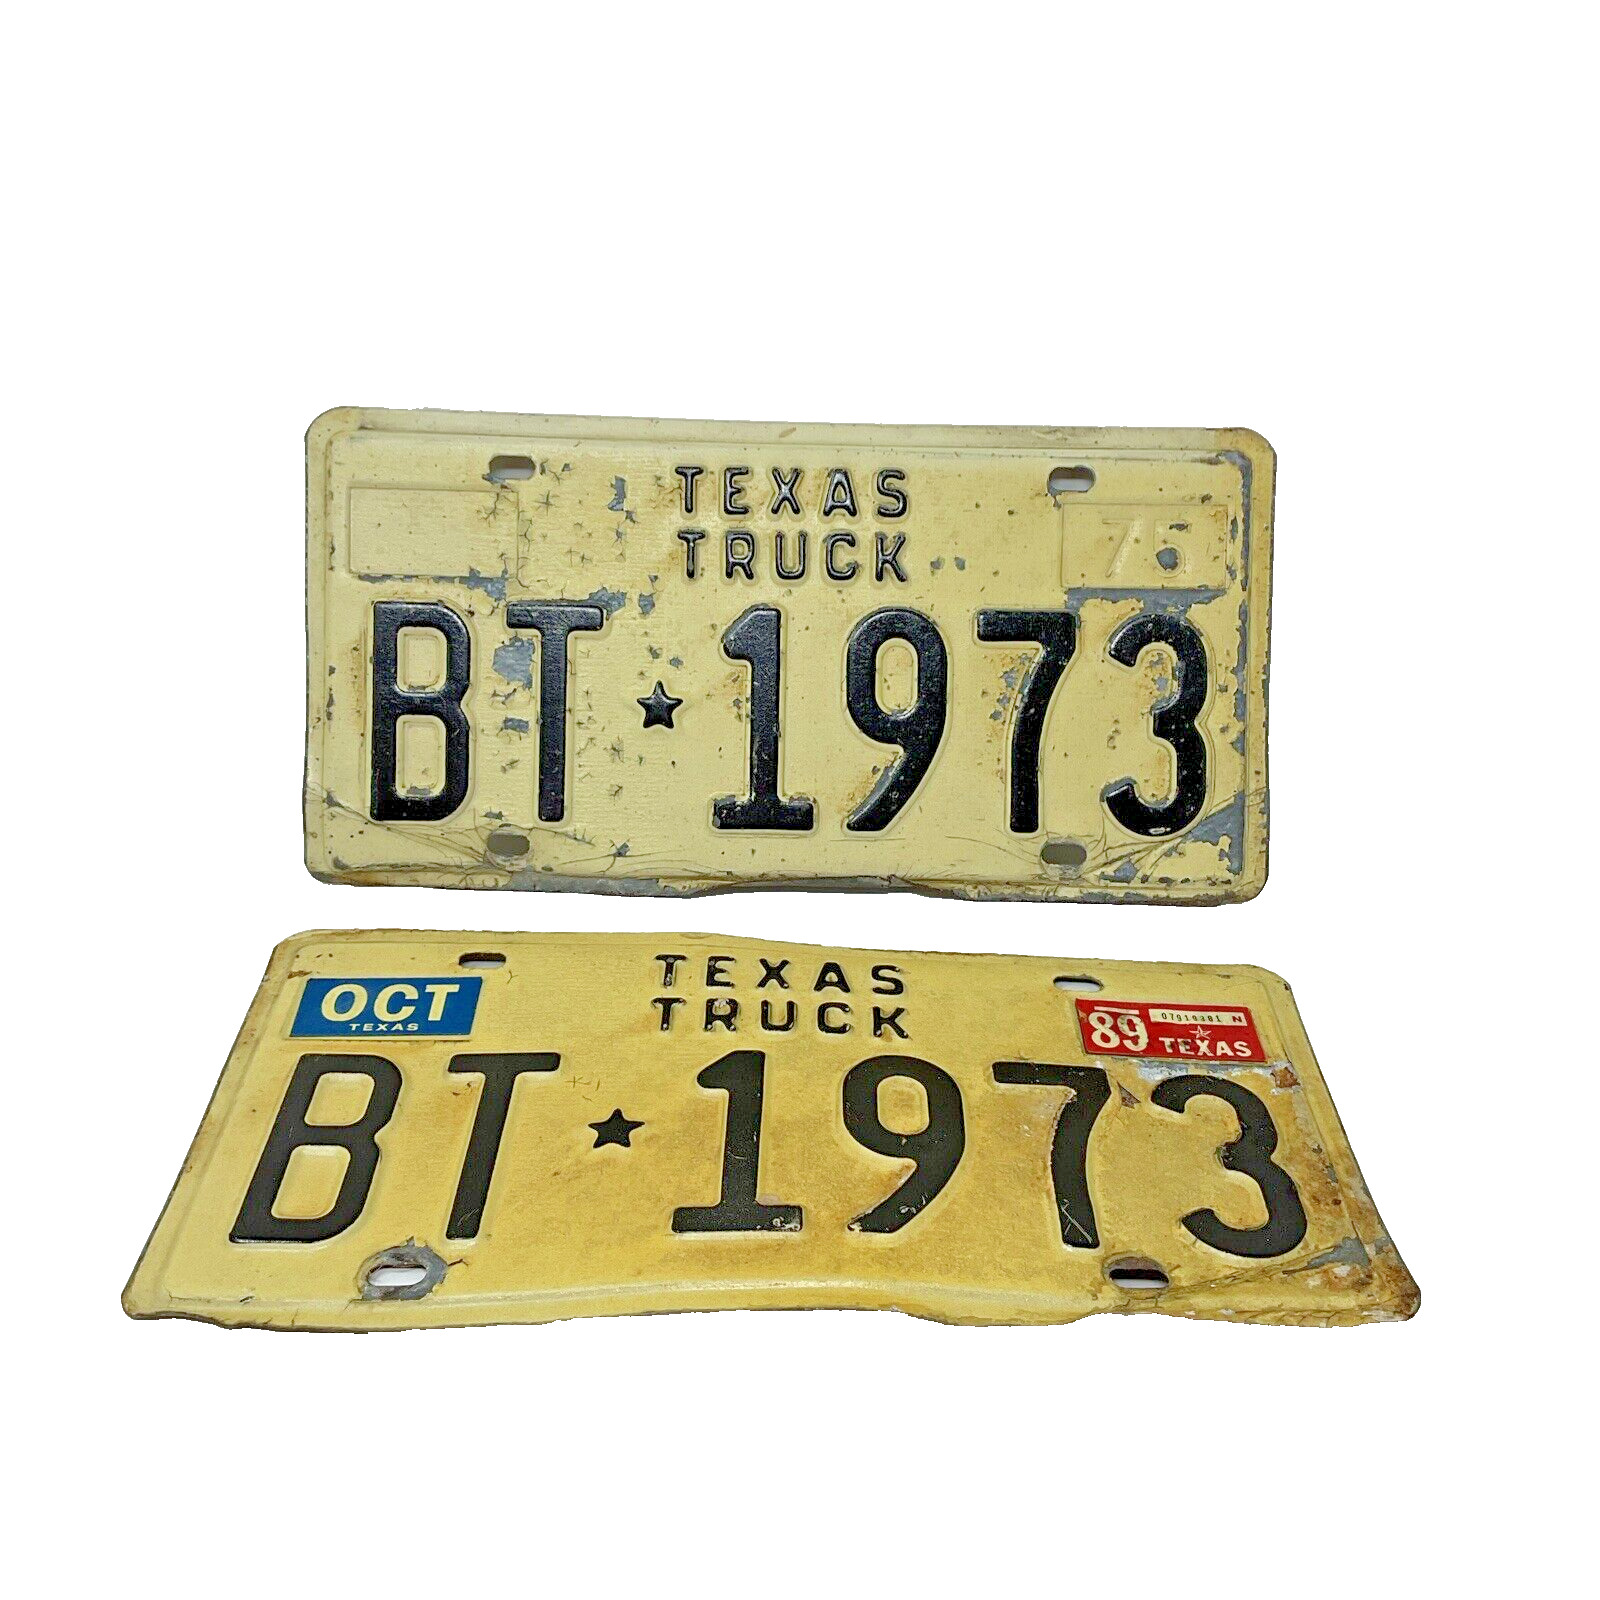 1975 TEXAS  TRUCK LICENSE PLATES BT- 1973 One with 89 Tag Pair 75 Vintage